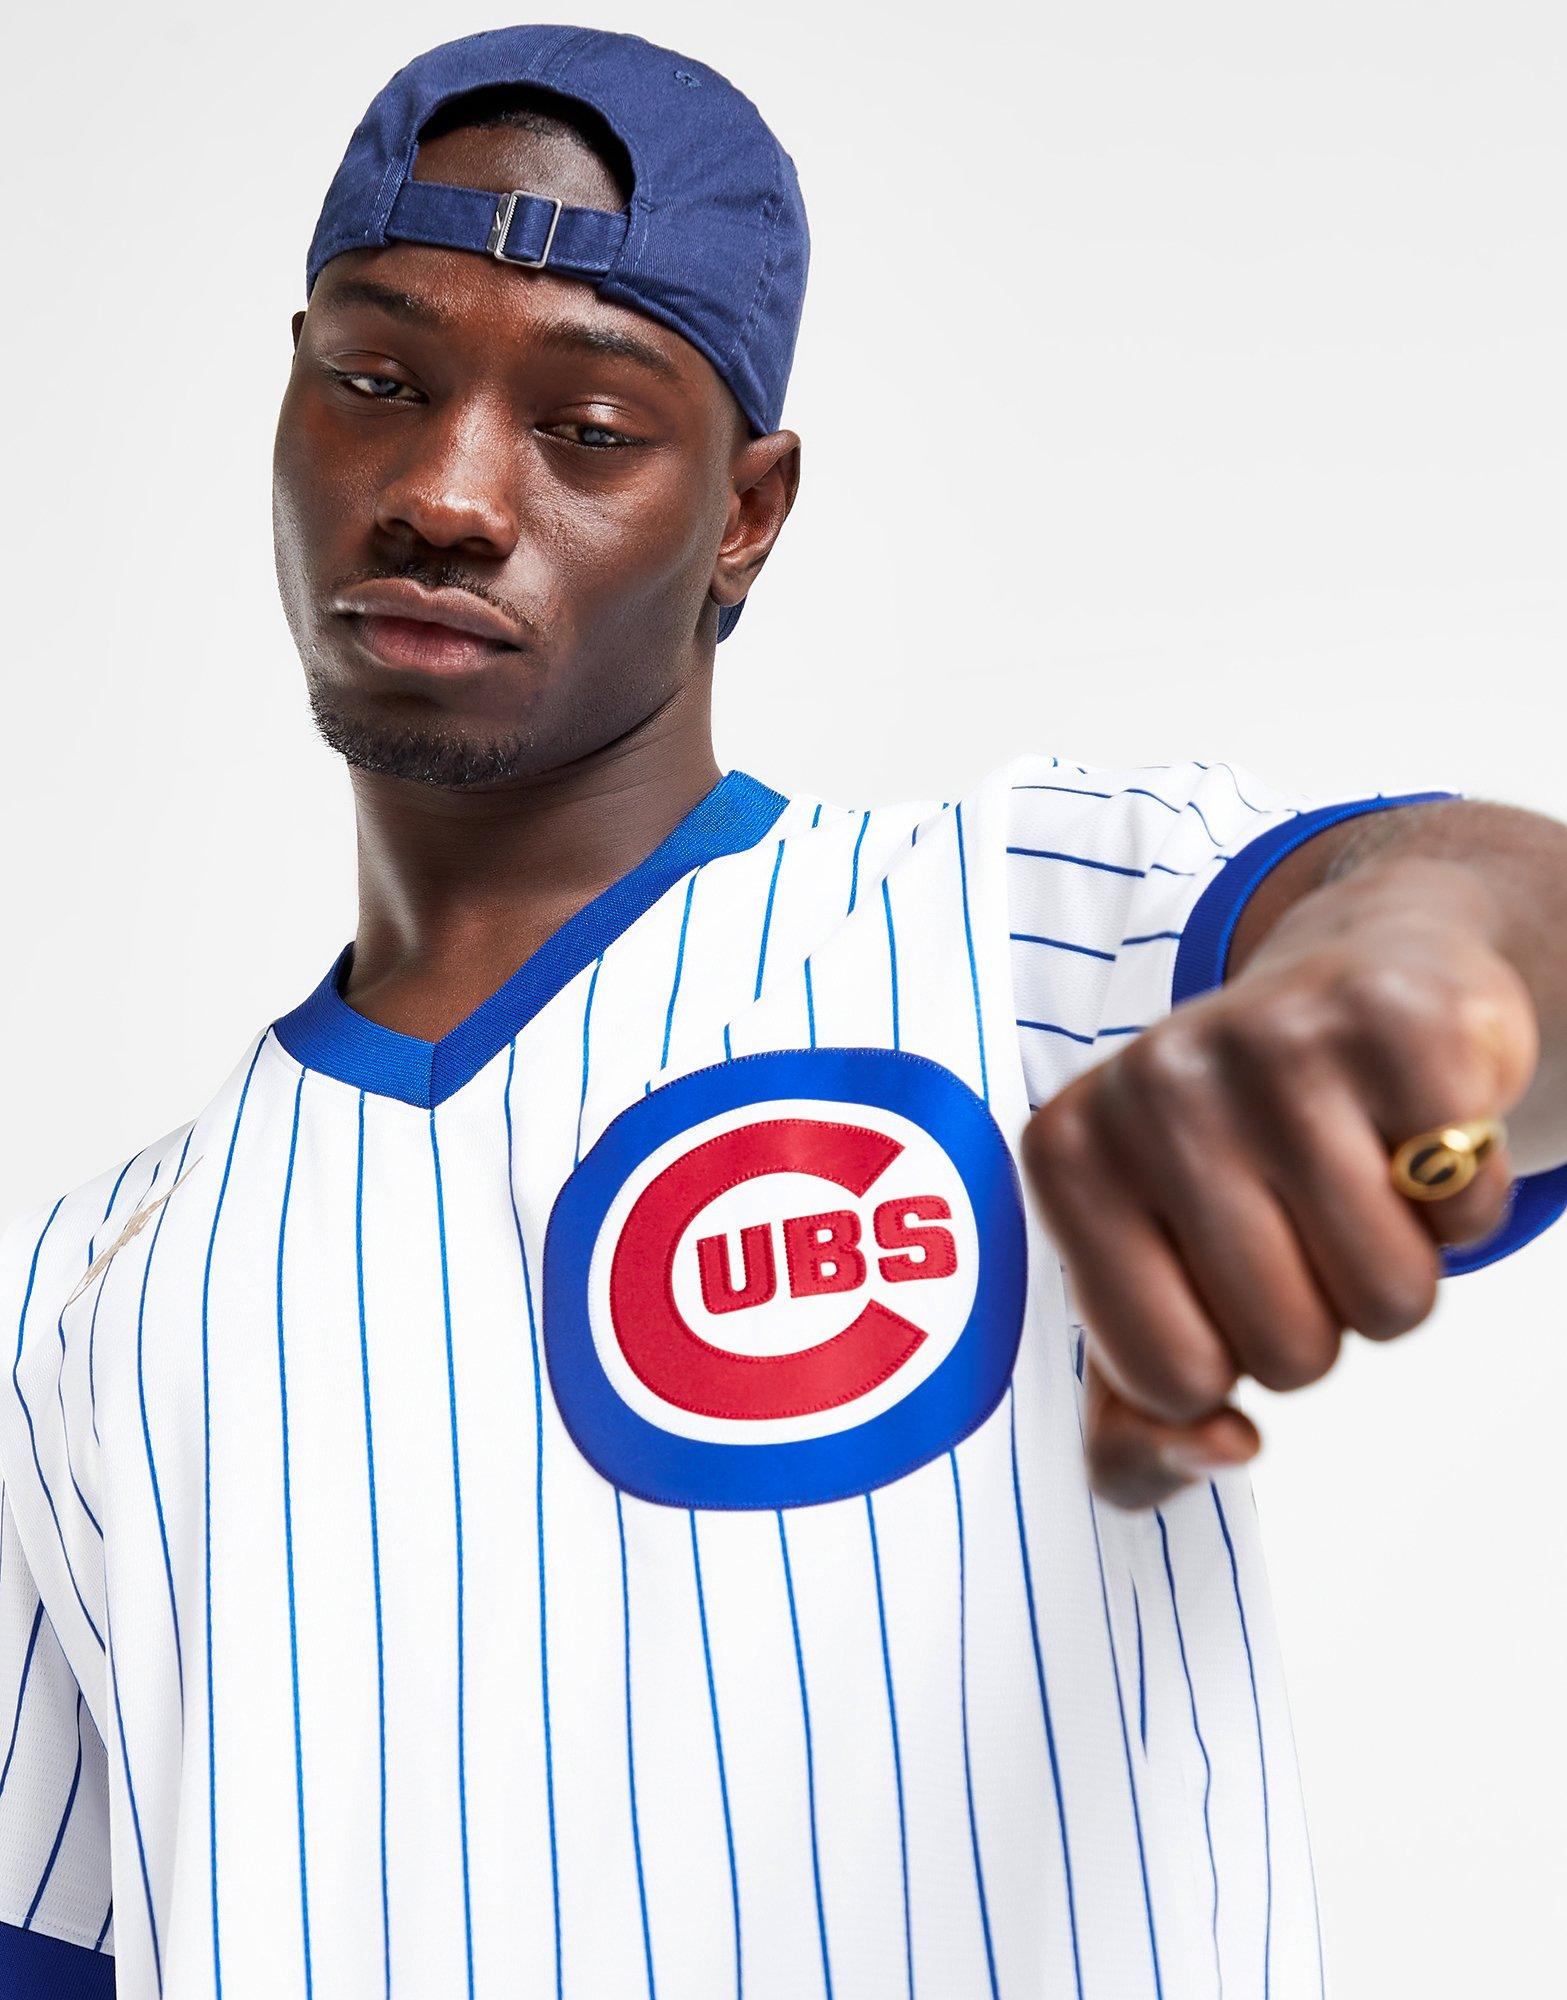 Chicago Cubs - JD Sports Global